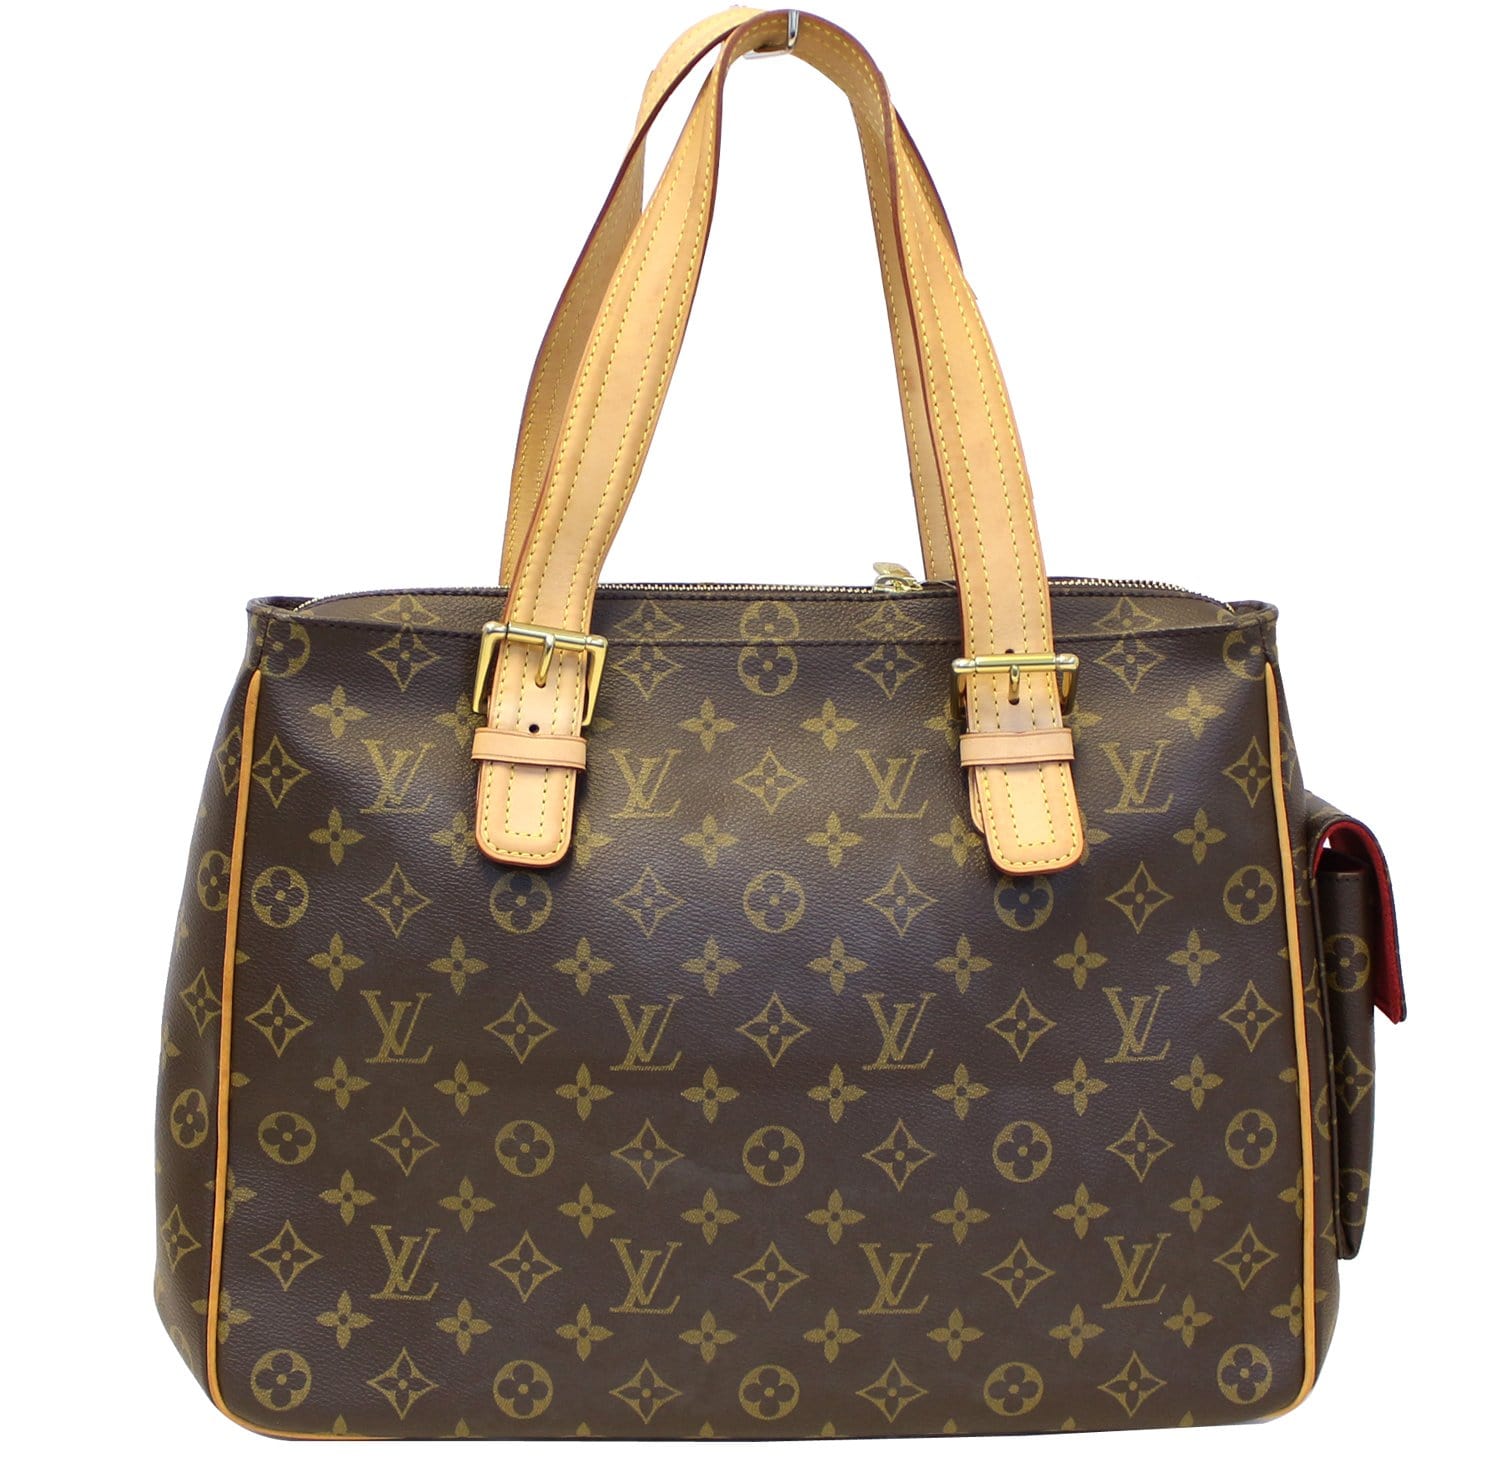 LOUIS VUITTON, Multiple Cite, bag, monogram canvas, lined, details in  leather and gold-colored brass, 3 outer pockets and 3 compartments inside,  marked LOUIS VUITTON PARIS made in France. Vintage clothing & Accessories 